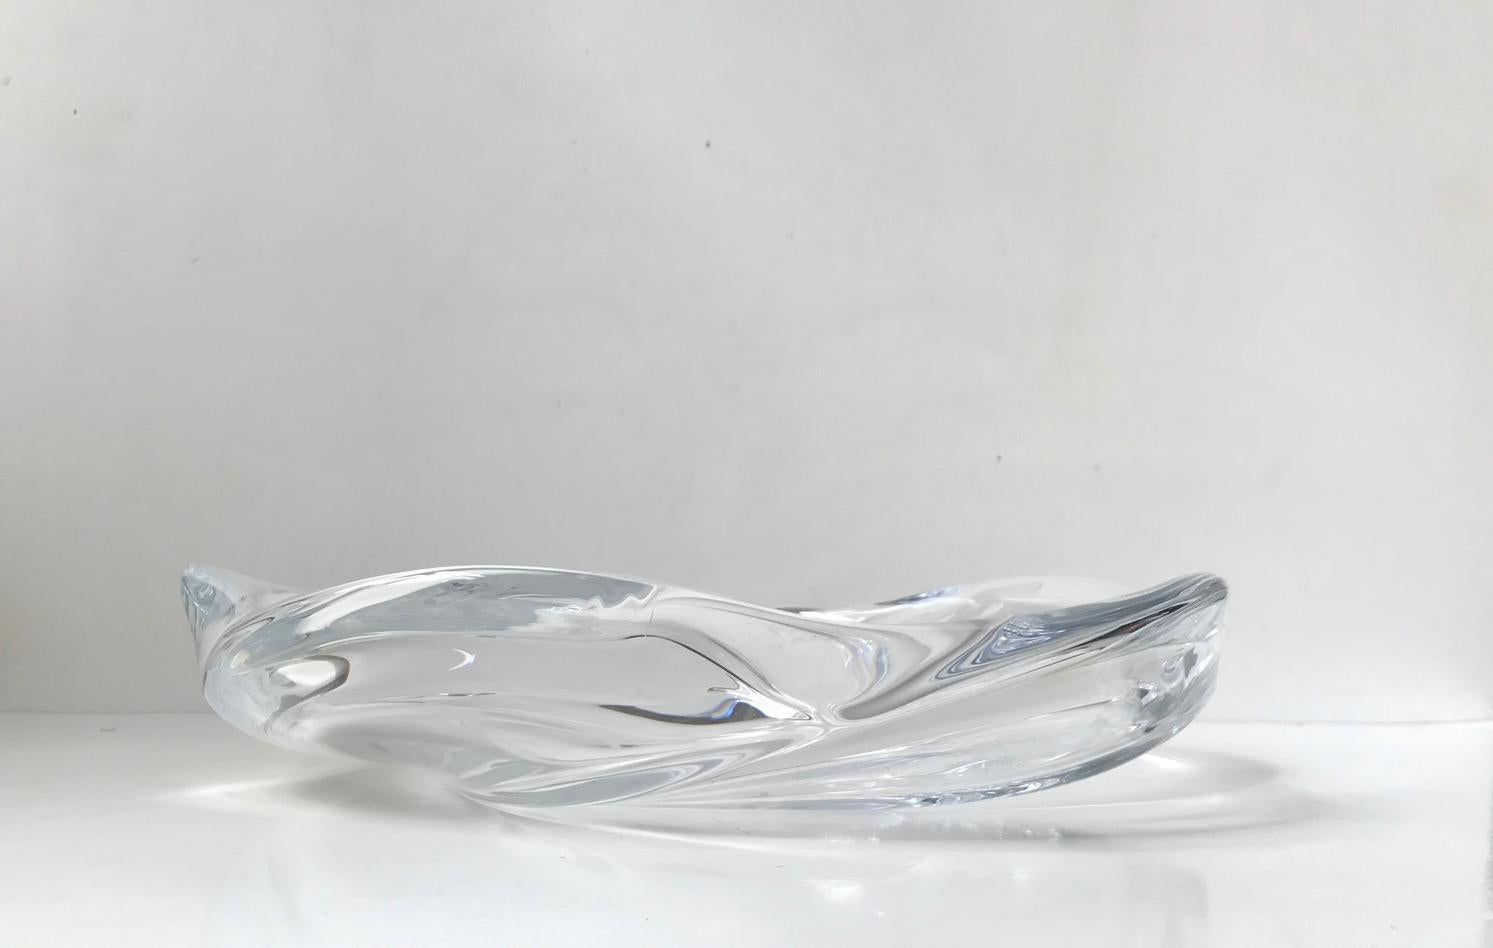 Wavy centerpiece crystal bowl designed by Silversmith Allan Scharff and manufactured by Royal Copenhagen during the 90s. The bowl is heavy and weighs in around 3 kg. Originally this bowl came with a sticker from Royal Copenhagen. This is no longer